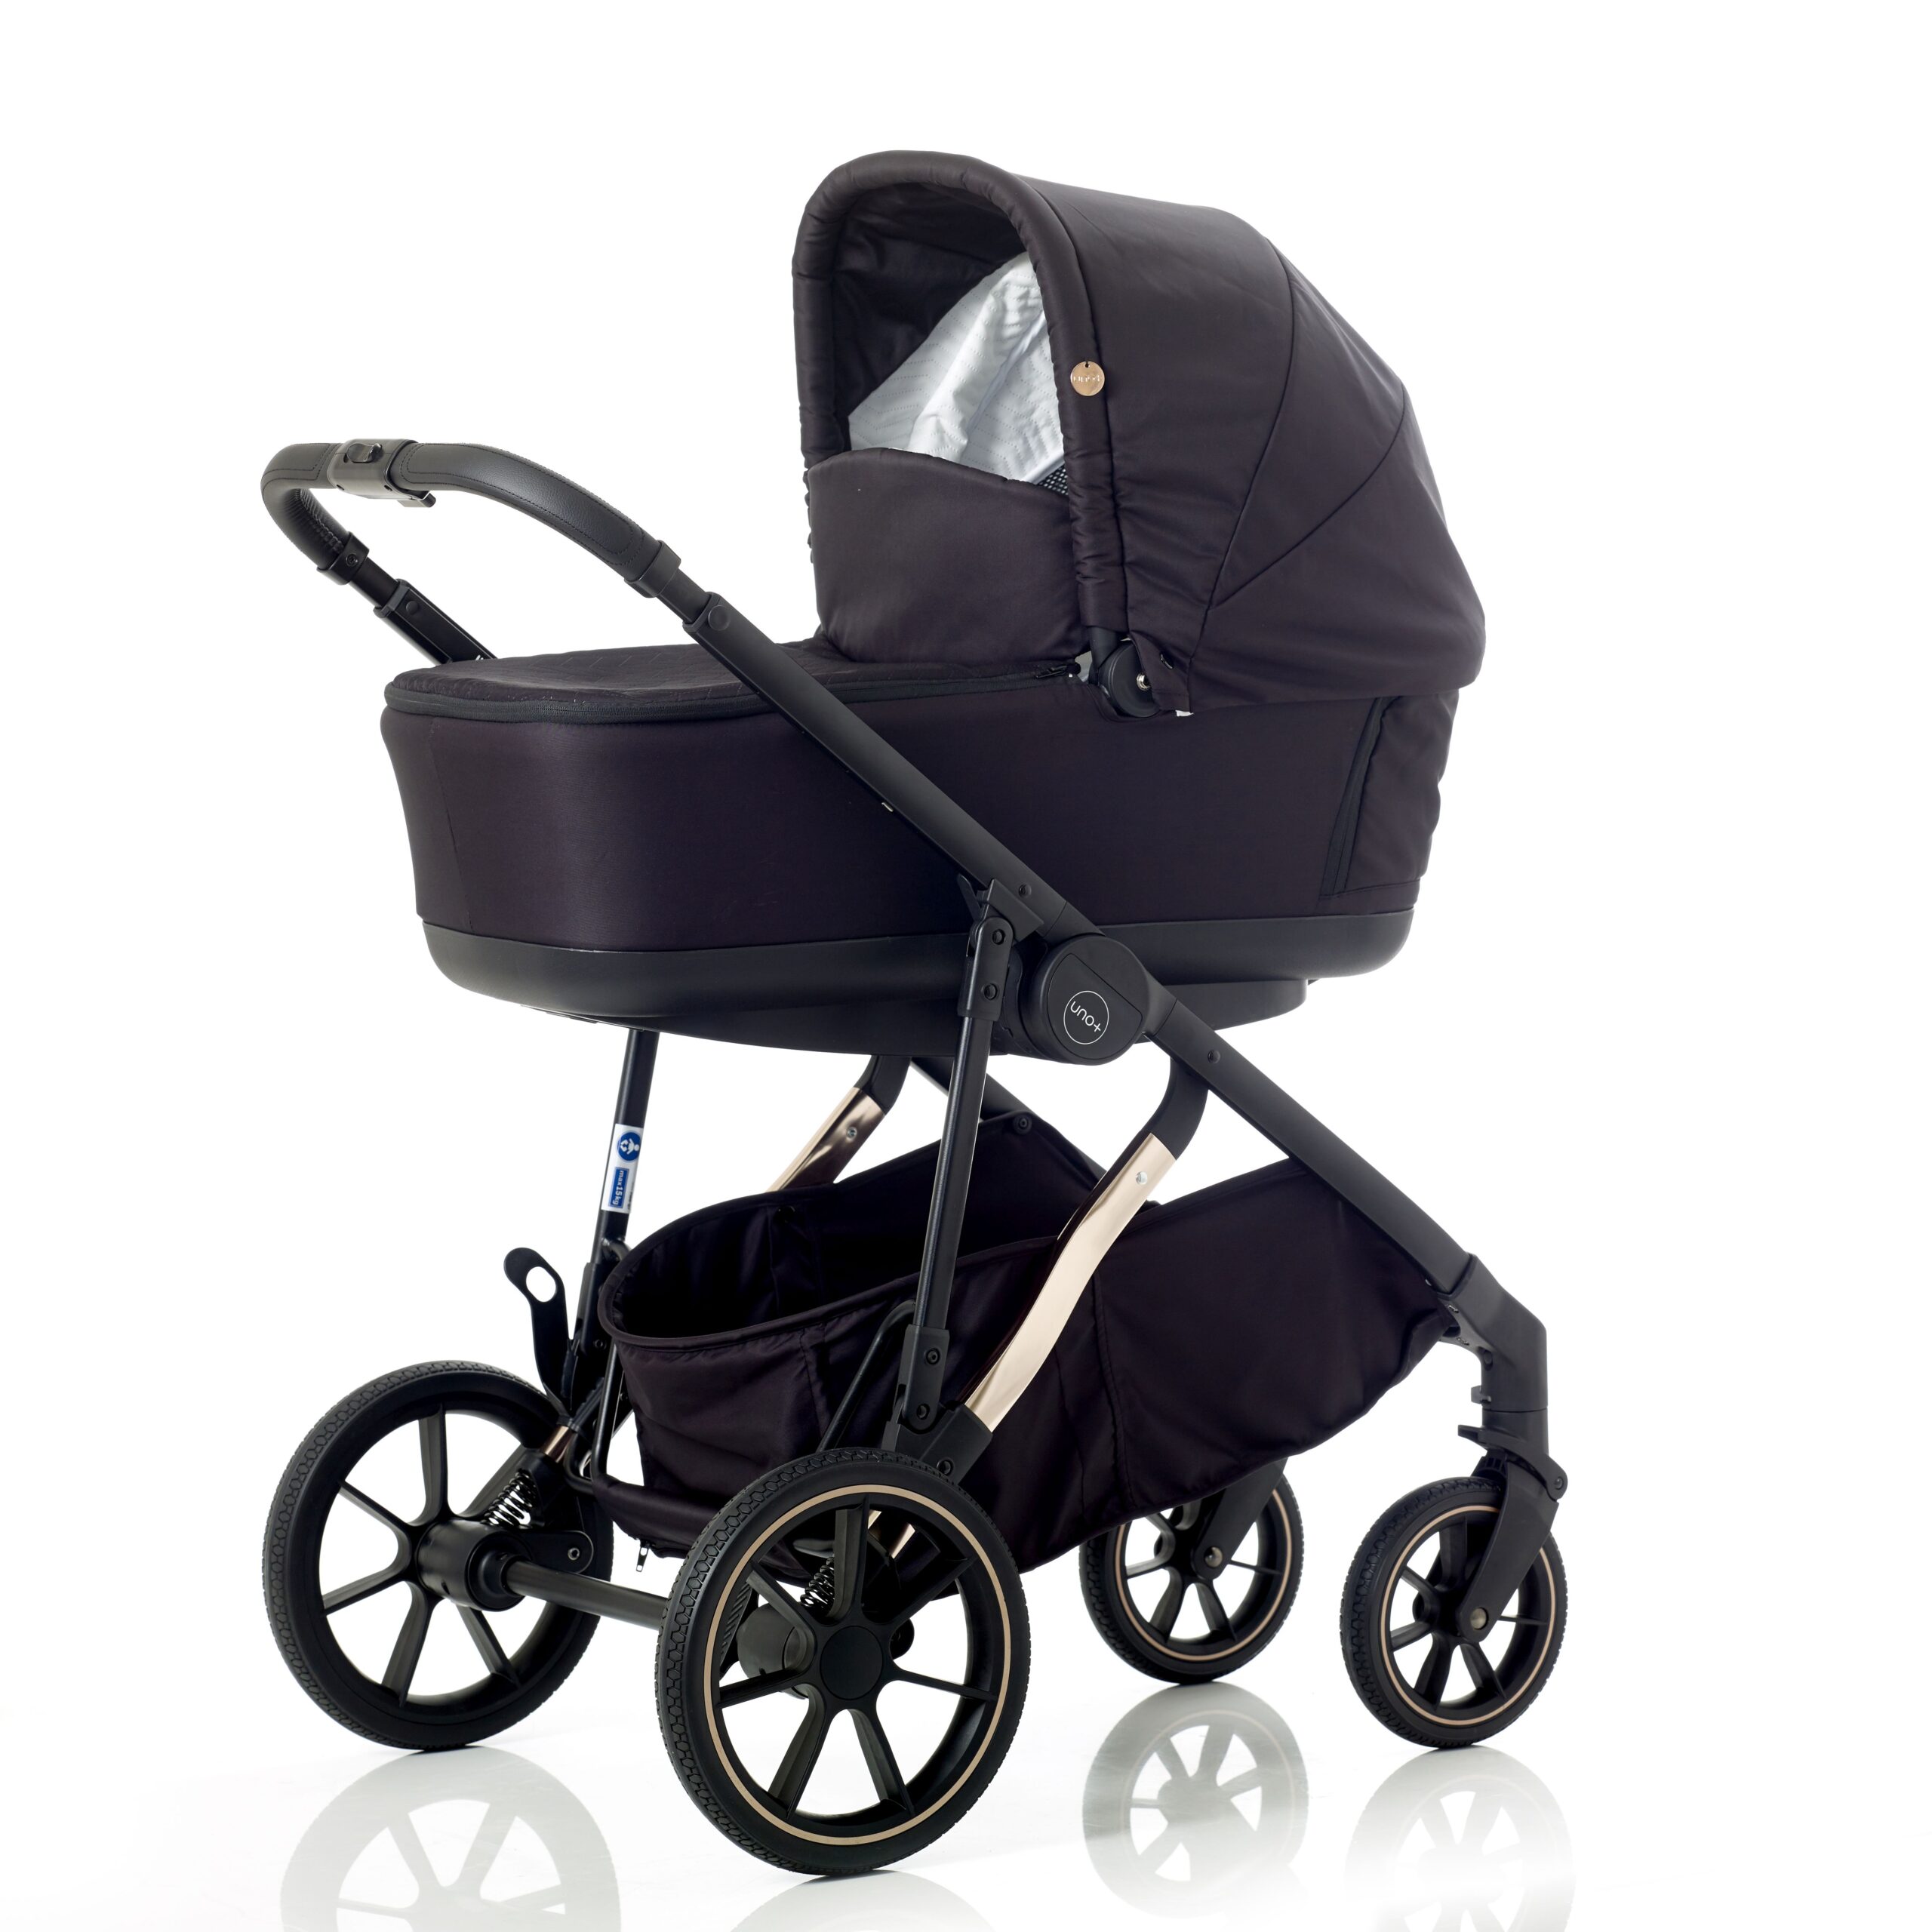 Photos - Pushchair Mee-go Uno Plus - 2in1 Travel System Dusty Rose BSR15401BR 